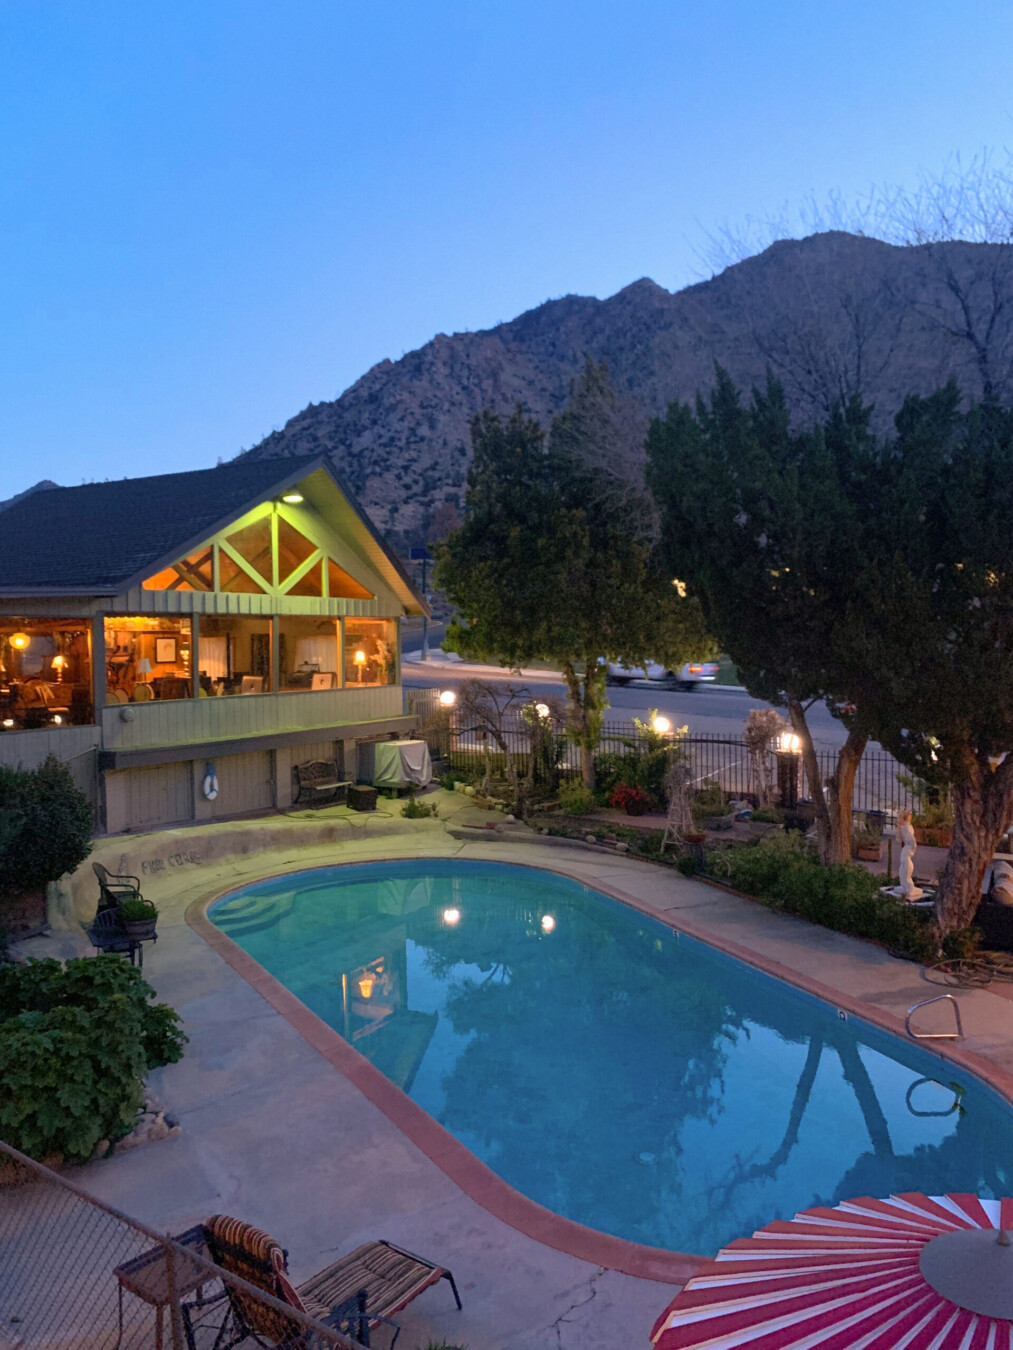 Birds eye view of the pool at dusk at a motel called Piazza's Pine Cone Inn in Kernville, California.